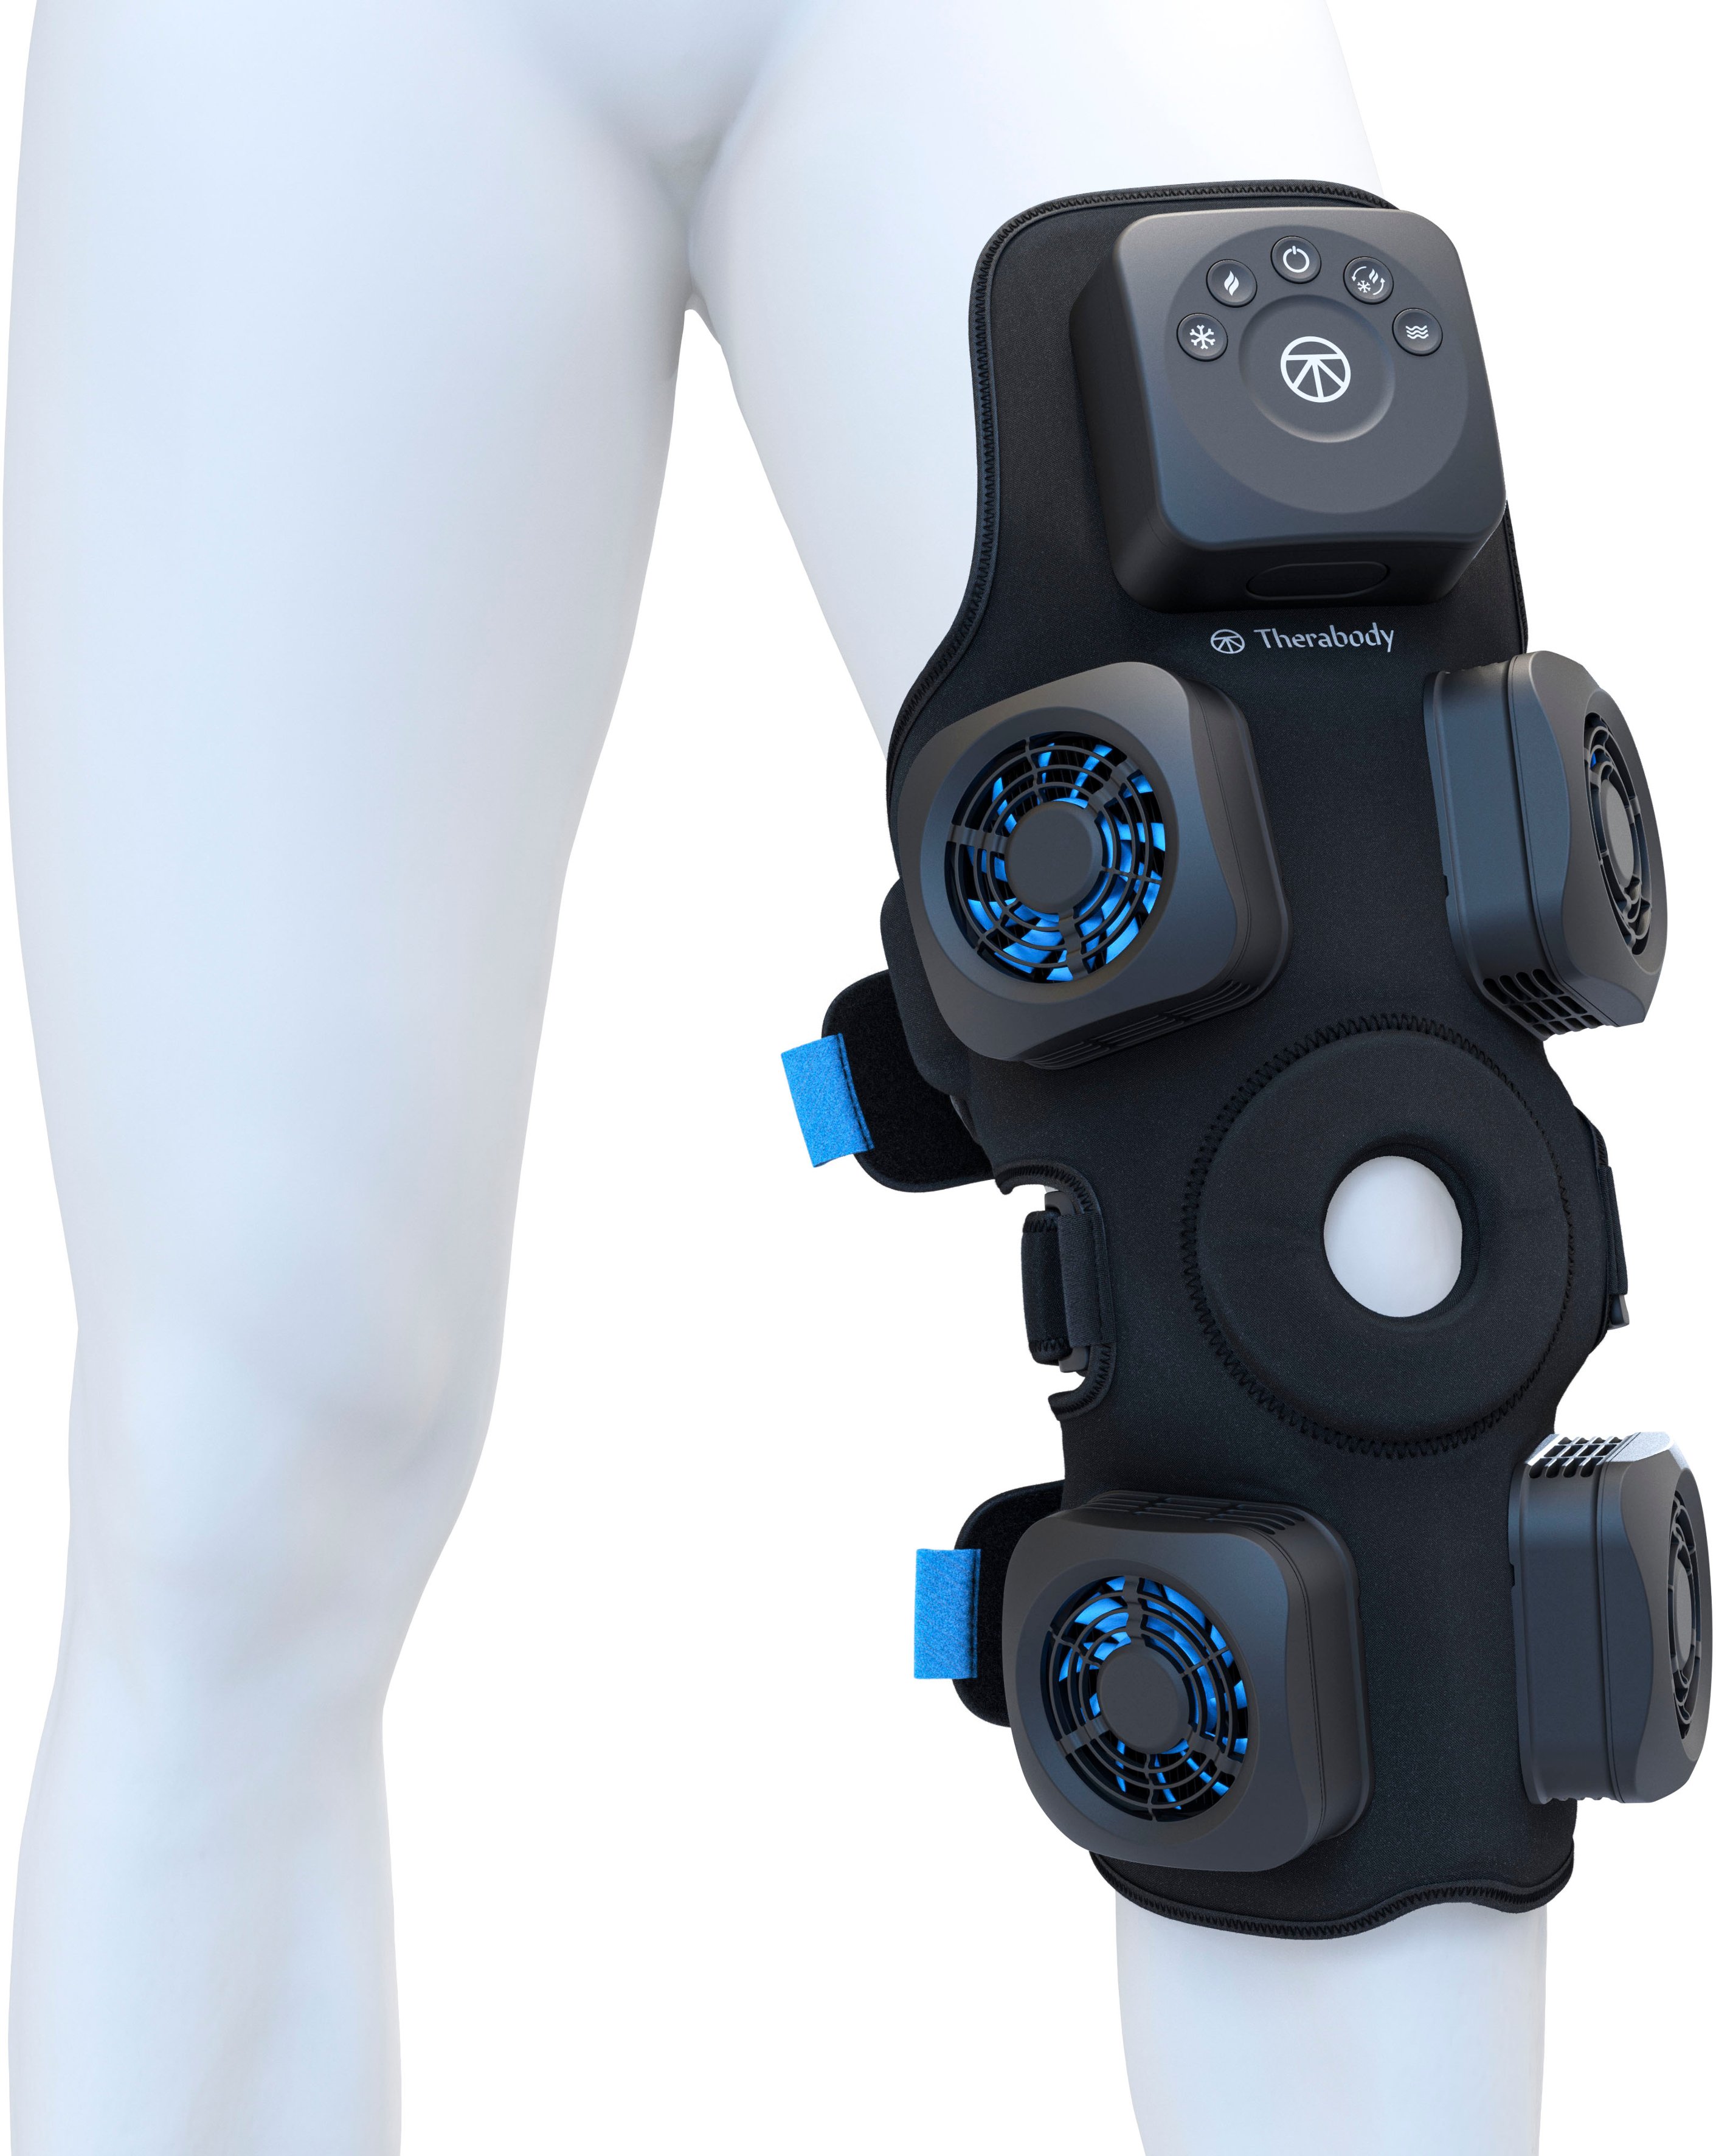 Heat Therapy Knee Wrap, For all body parts